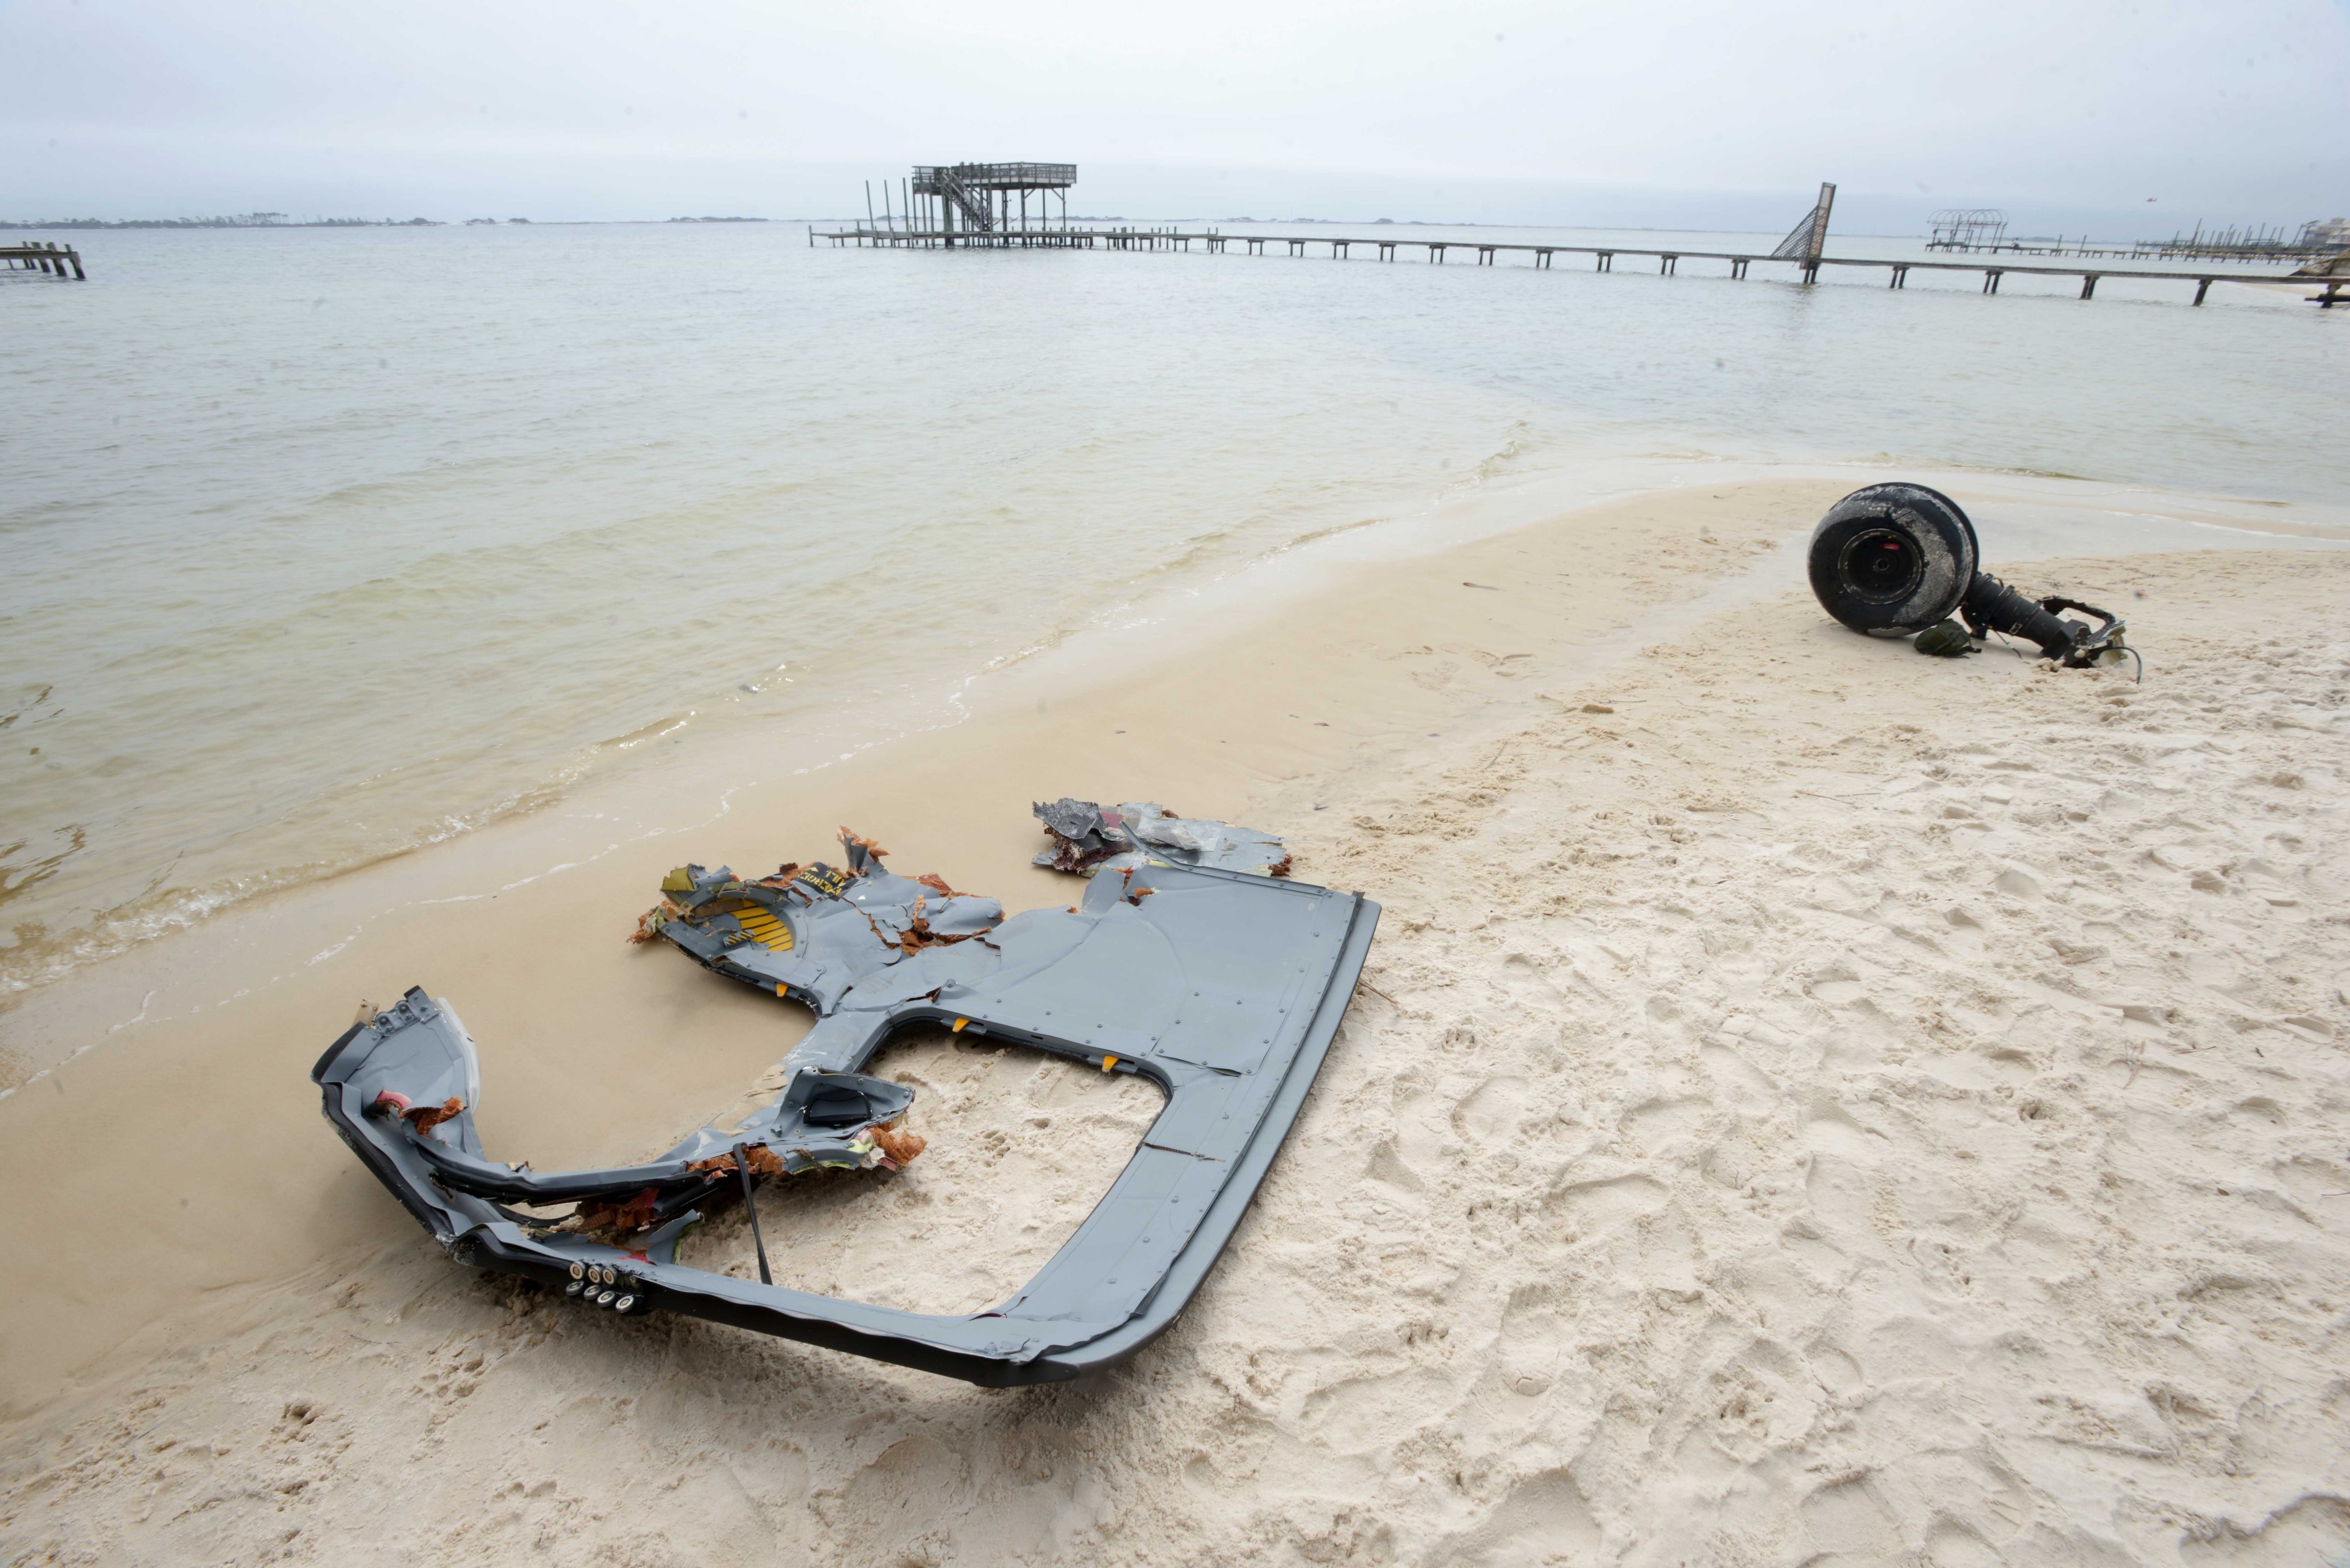 A wheel and pieces of fuselage from an Army Black Hawk helicopter sit along the shoreline of Santa Rosa Sound near Navarre, Fla. on Wednesday, March 11, 2015